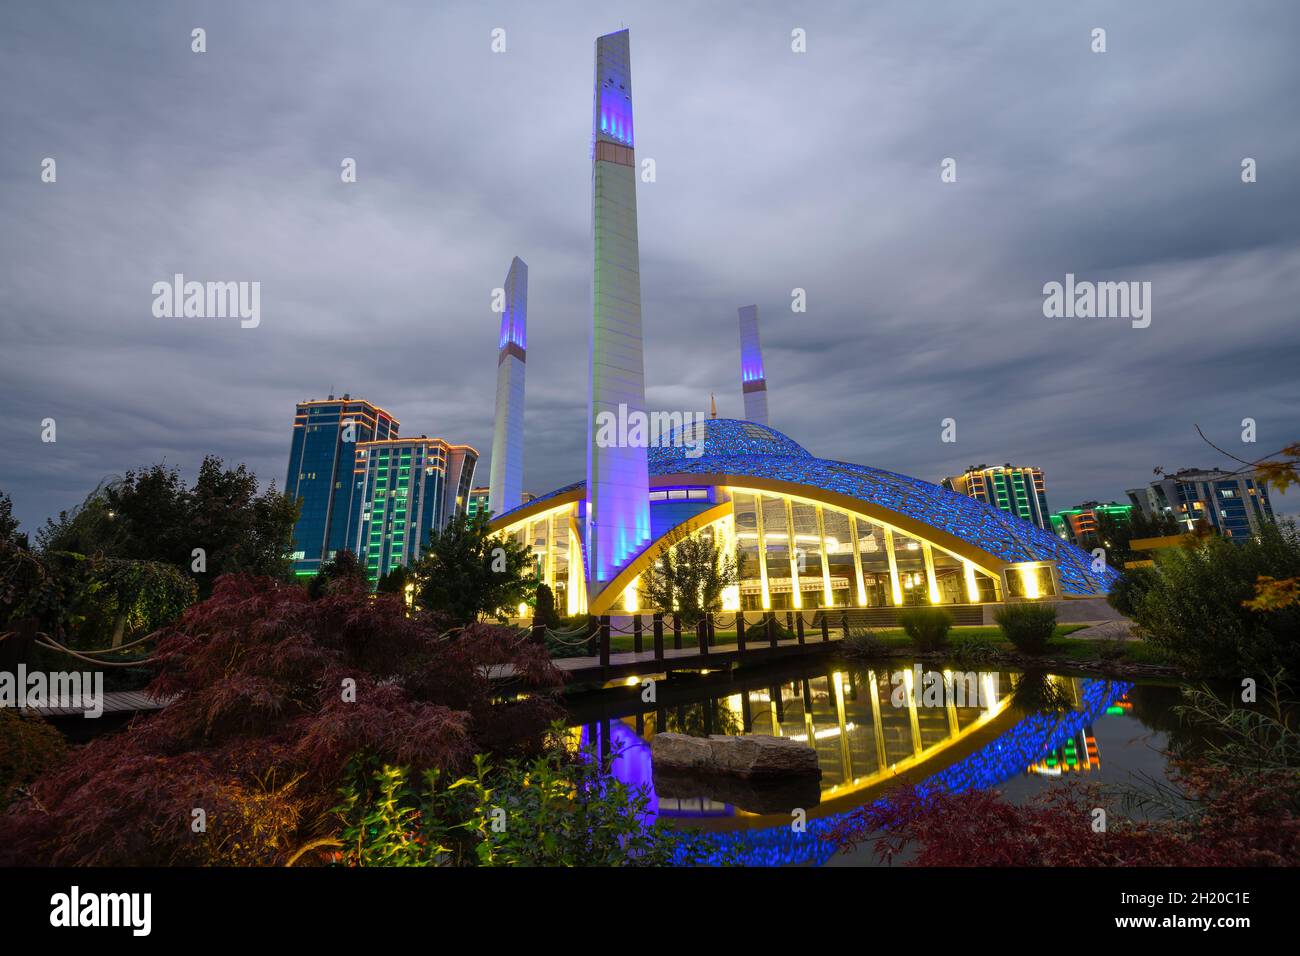 ARGUN, RUSSIA - SEPTEMBER 28, 2021: Mosque 'Mother's Heart' in the cityscape on a cloudy September evening Stock Photo